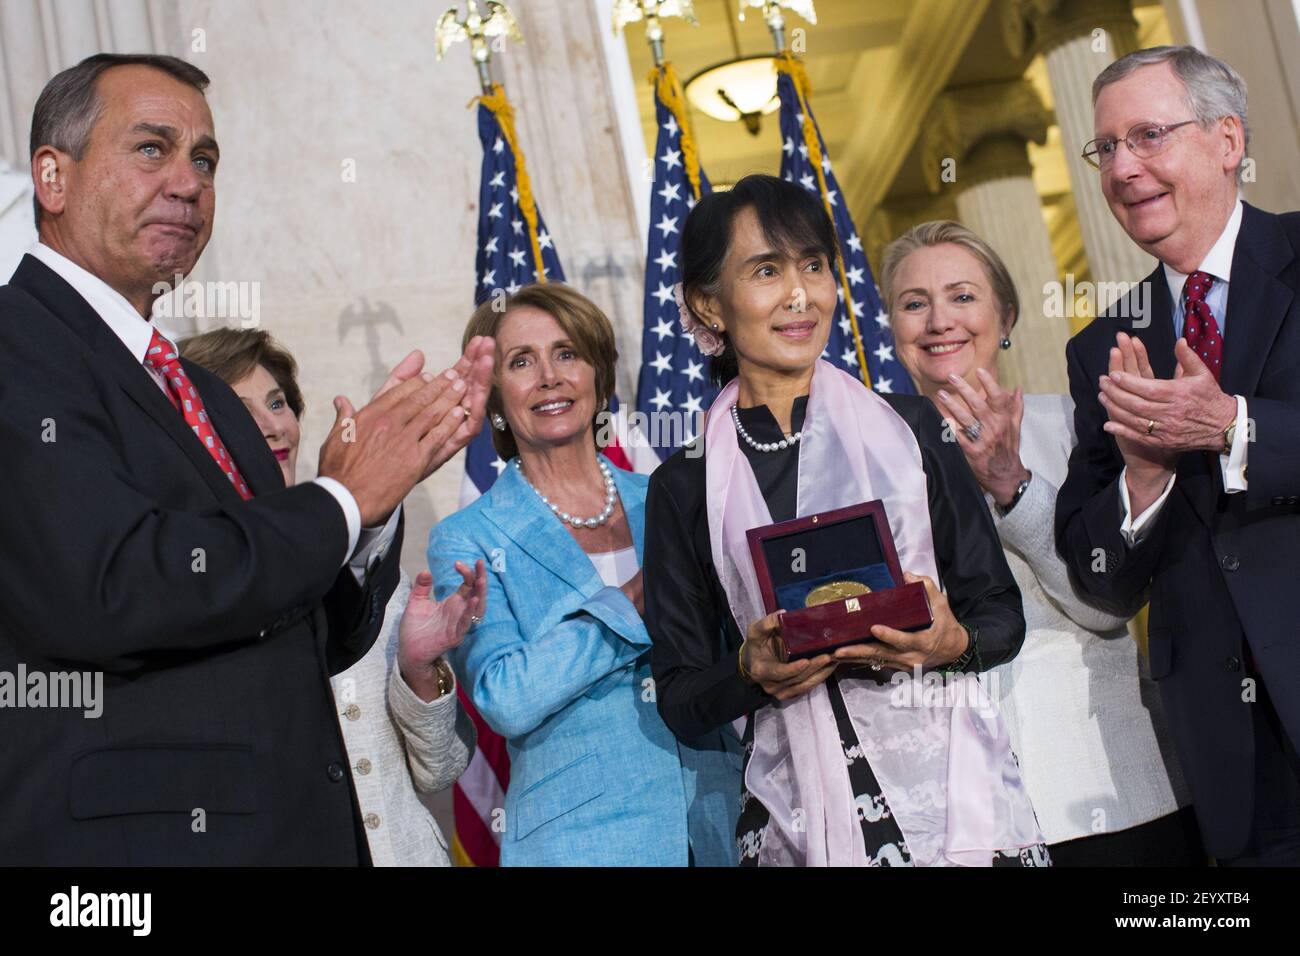 19 September 2012 - Washington, D.C. - Burmese civil rights activist Daw Aung San Suu Kyi, center, is awarded the Congressional Gold Medal during a ceremony in the Rotunda of the United States Capitol Building. Presenting the medal are (from left) Speaker Of The House John Boehner, Former First Lady Laura Bush, House Minority Leader Nancy Pelosi, Secretary of State Hillary Clinton and Senate Minority Leader Mitch McConnell. Photo Credit: Kristoffer Tripplaar/ Sipa USA Stock Photo